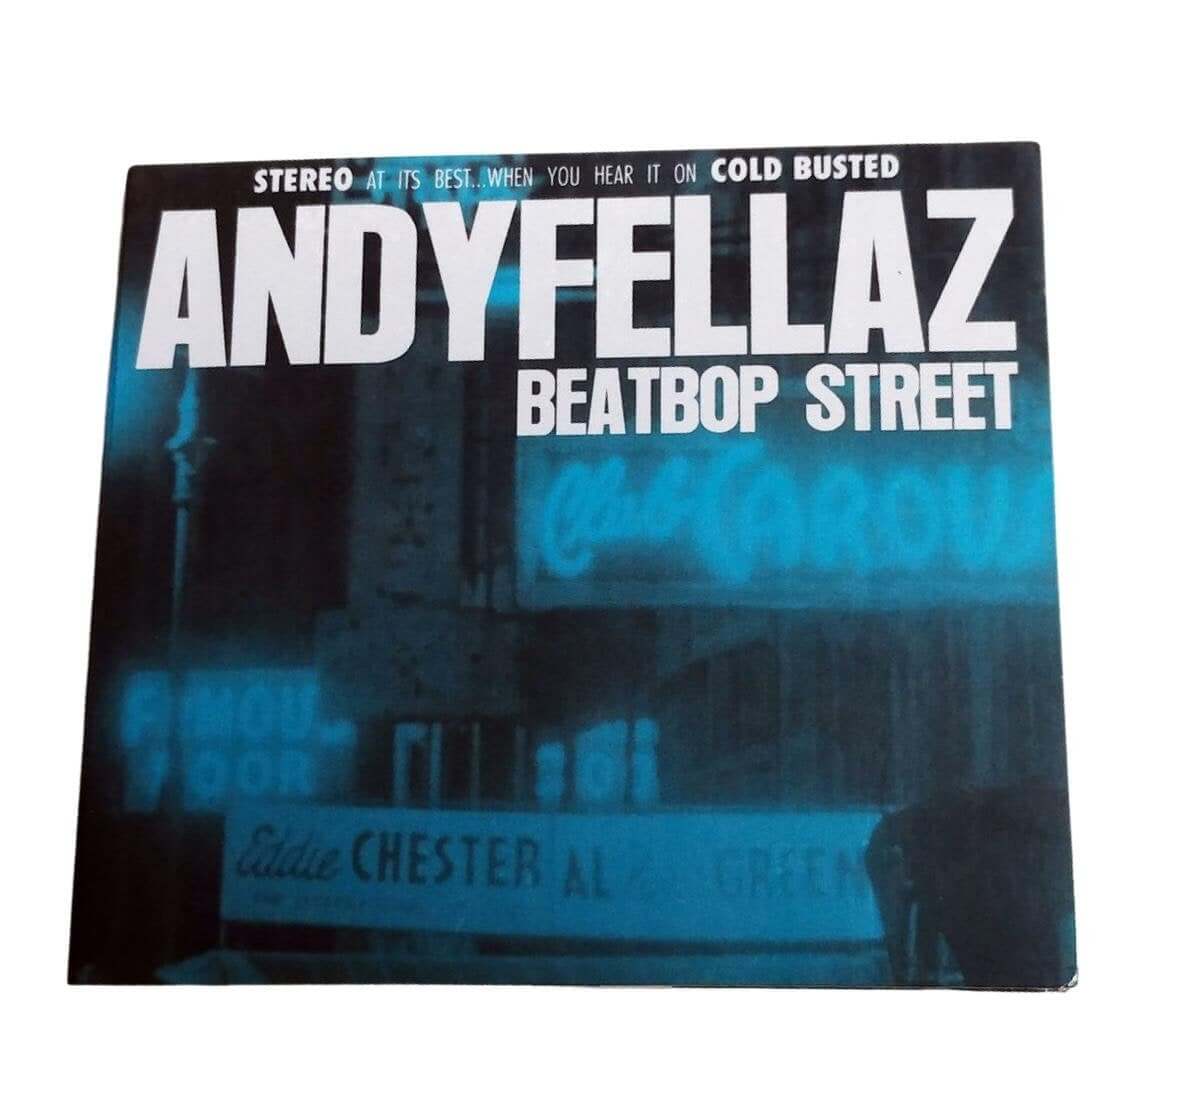 AndyFellaz - BeatBop Street - Limited Edition Compact Disc - Cold Busted